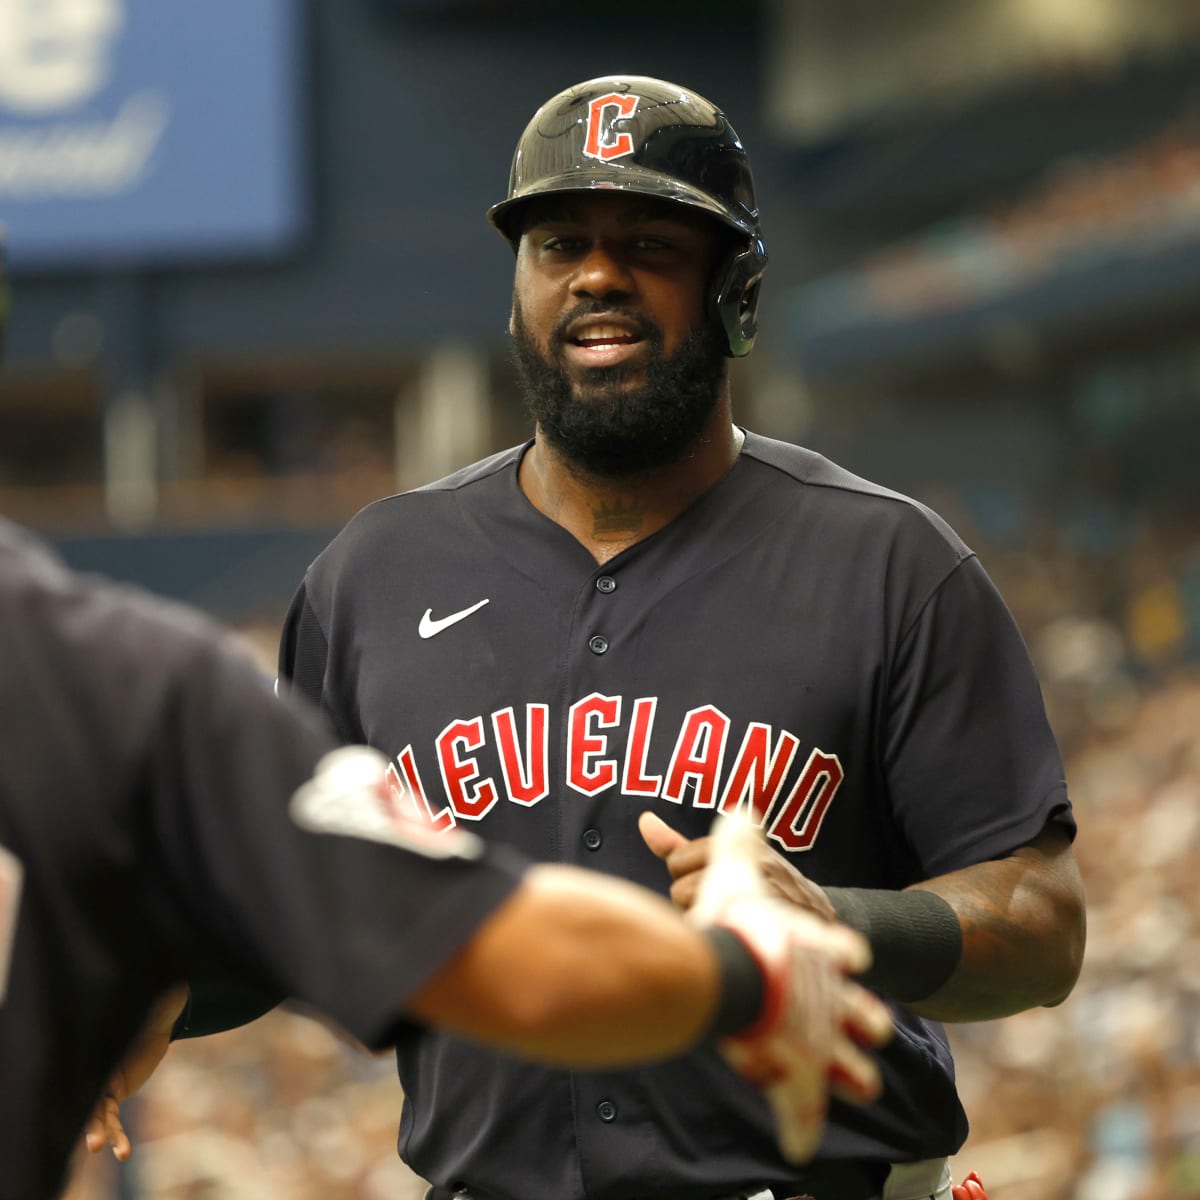 Cubs claim Franmil Reyes From the Cleveland Guardians – NBC Chicago